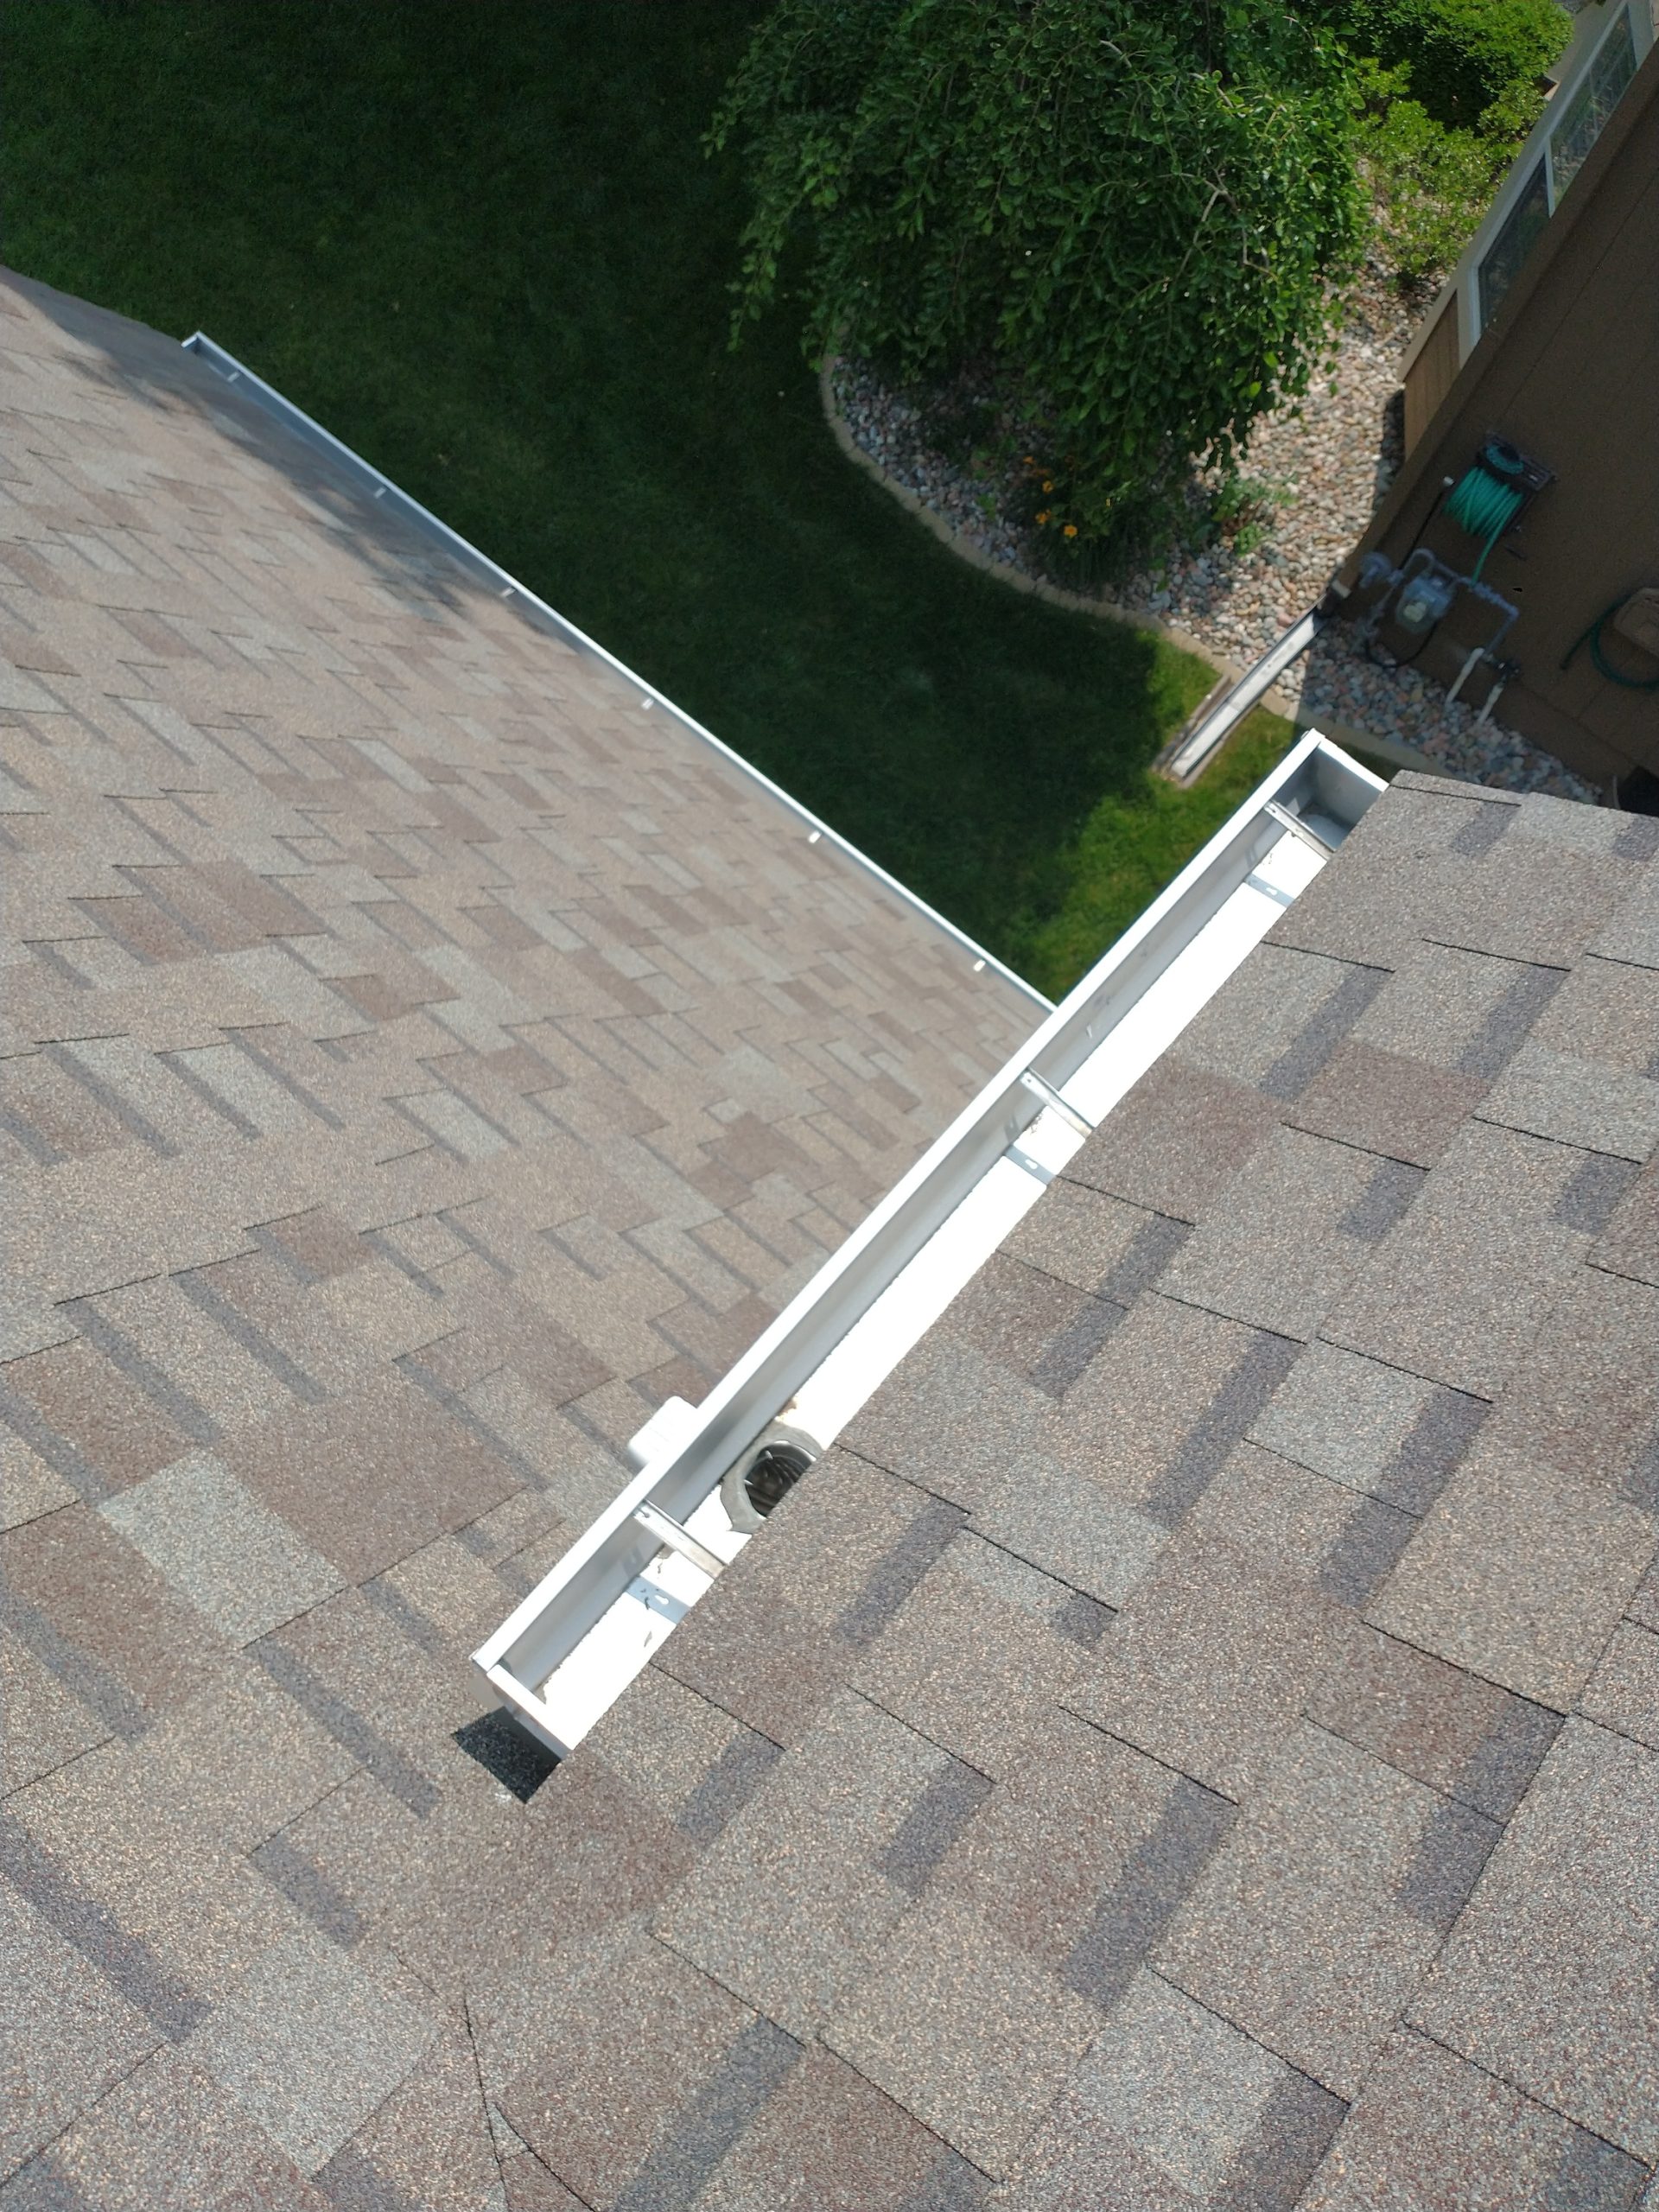 Completed Gutter Cleaning in St Paul for Claire's Home